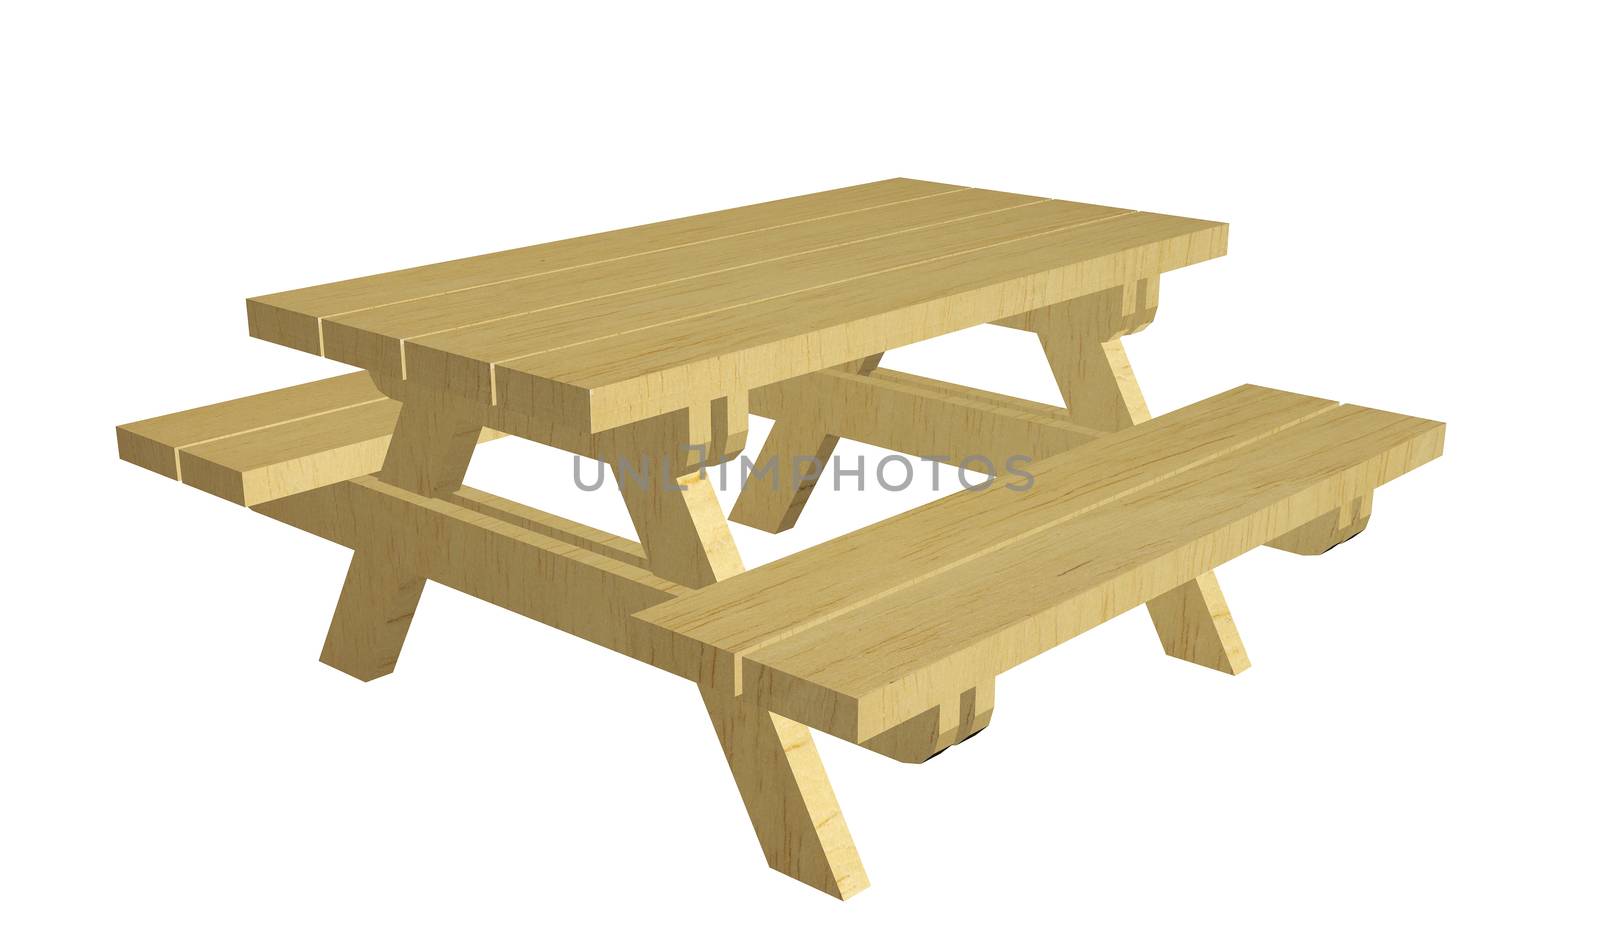 Wooden picnic table, 3d illustration by Morphart